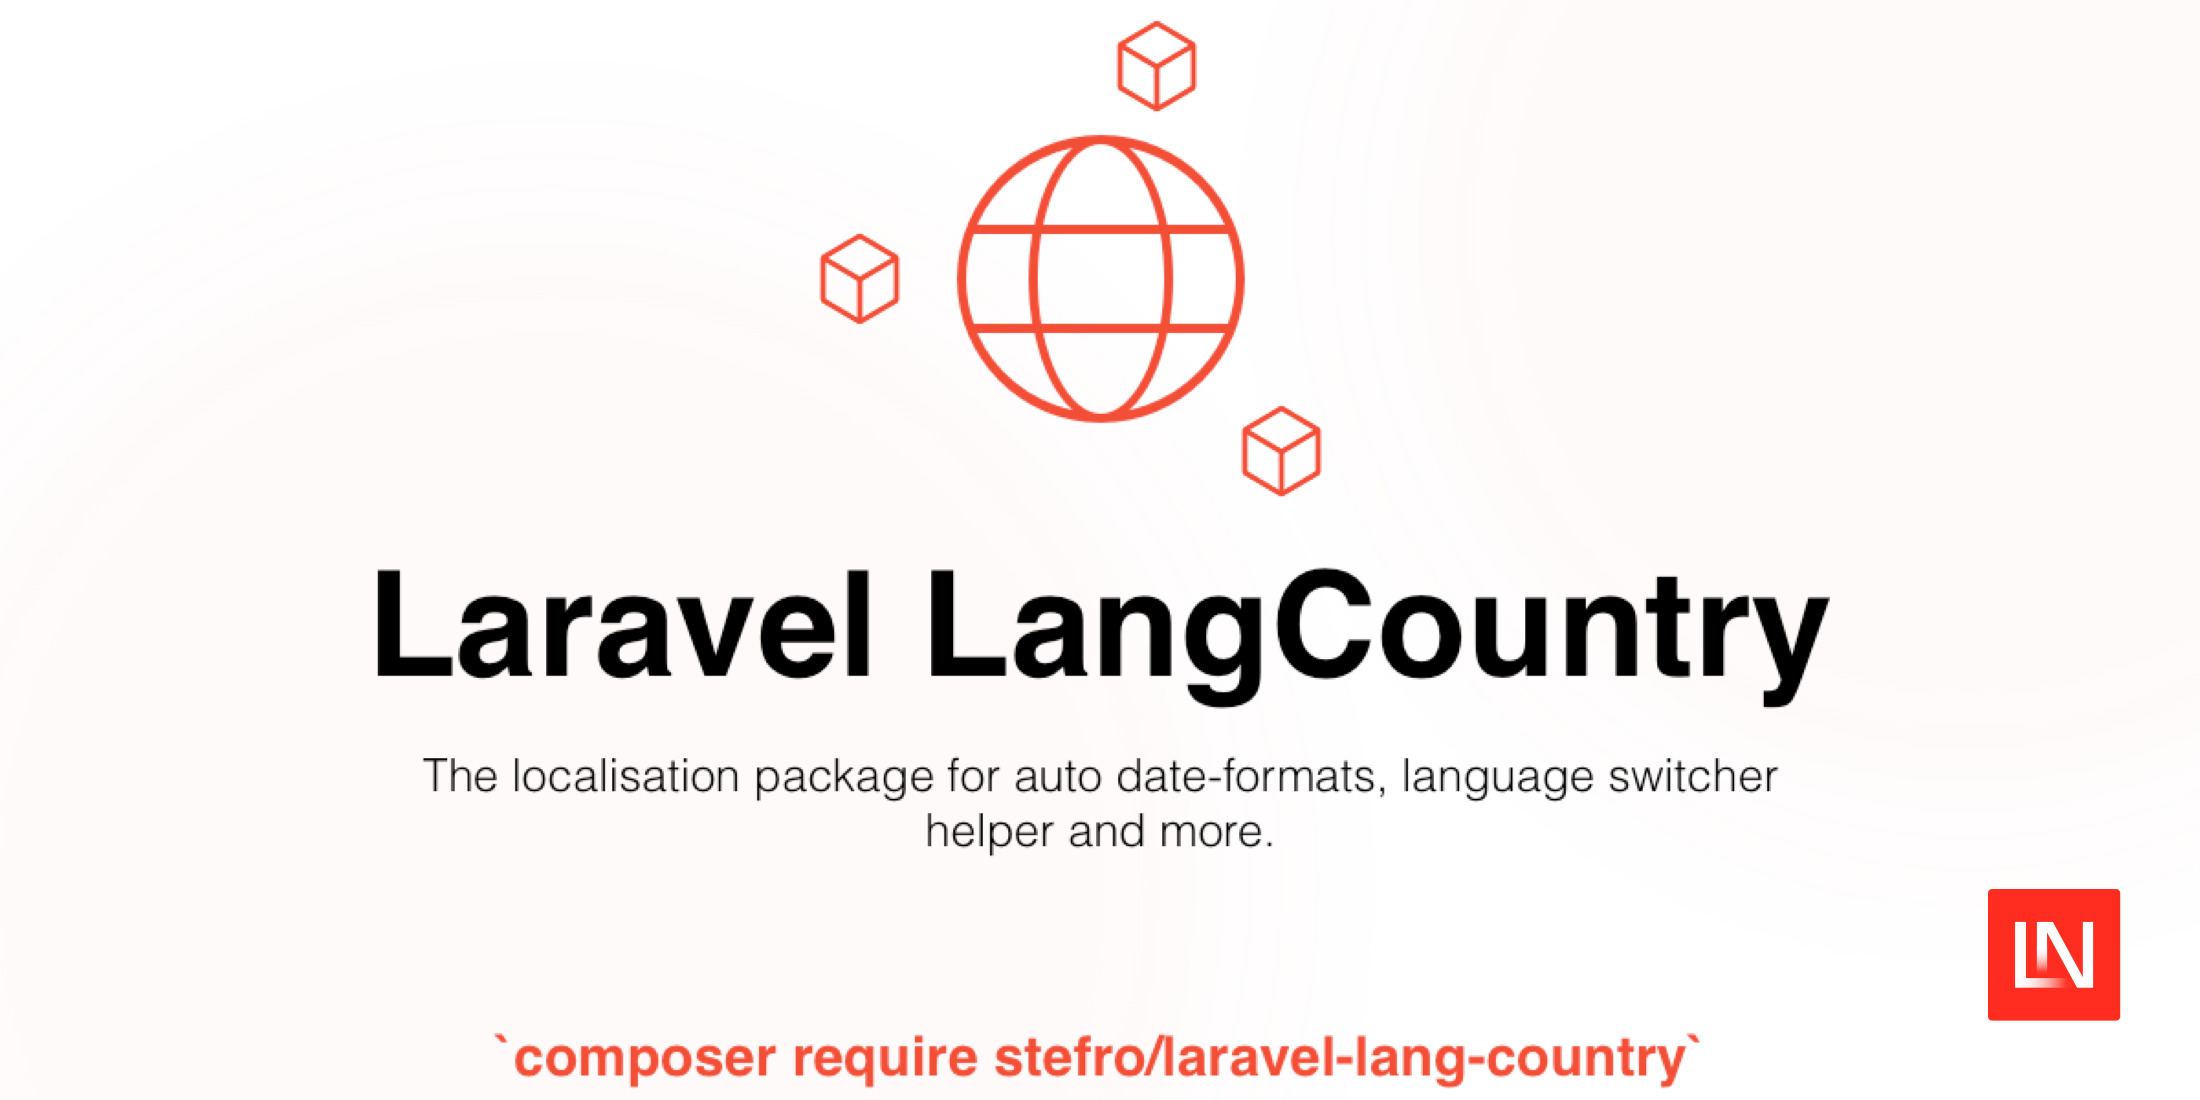 LangCountry is a Localization Package for Laravel image